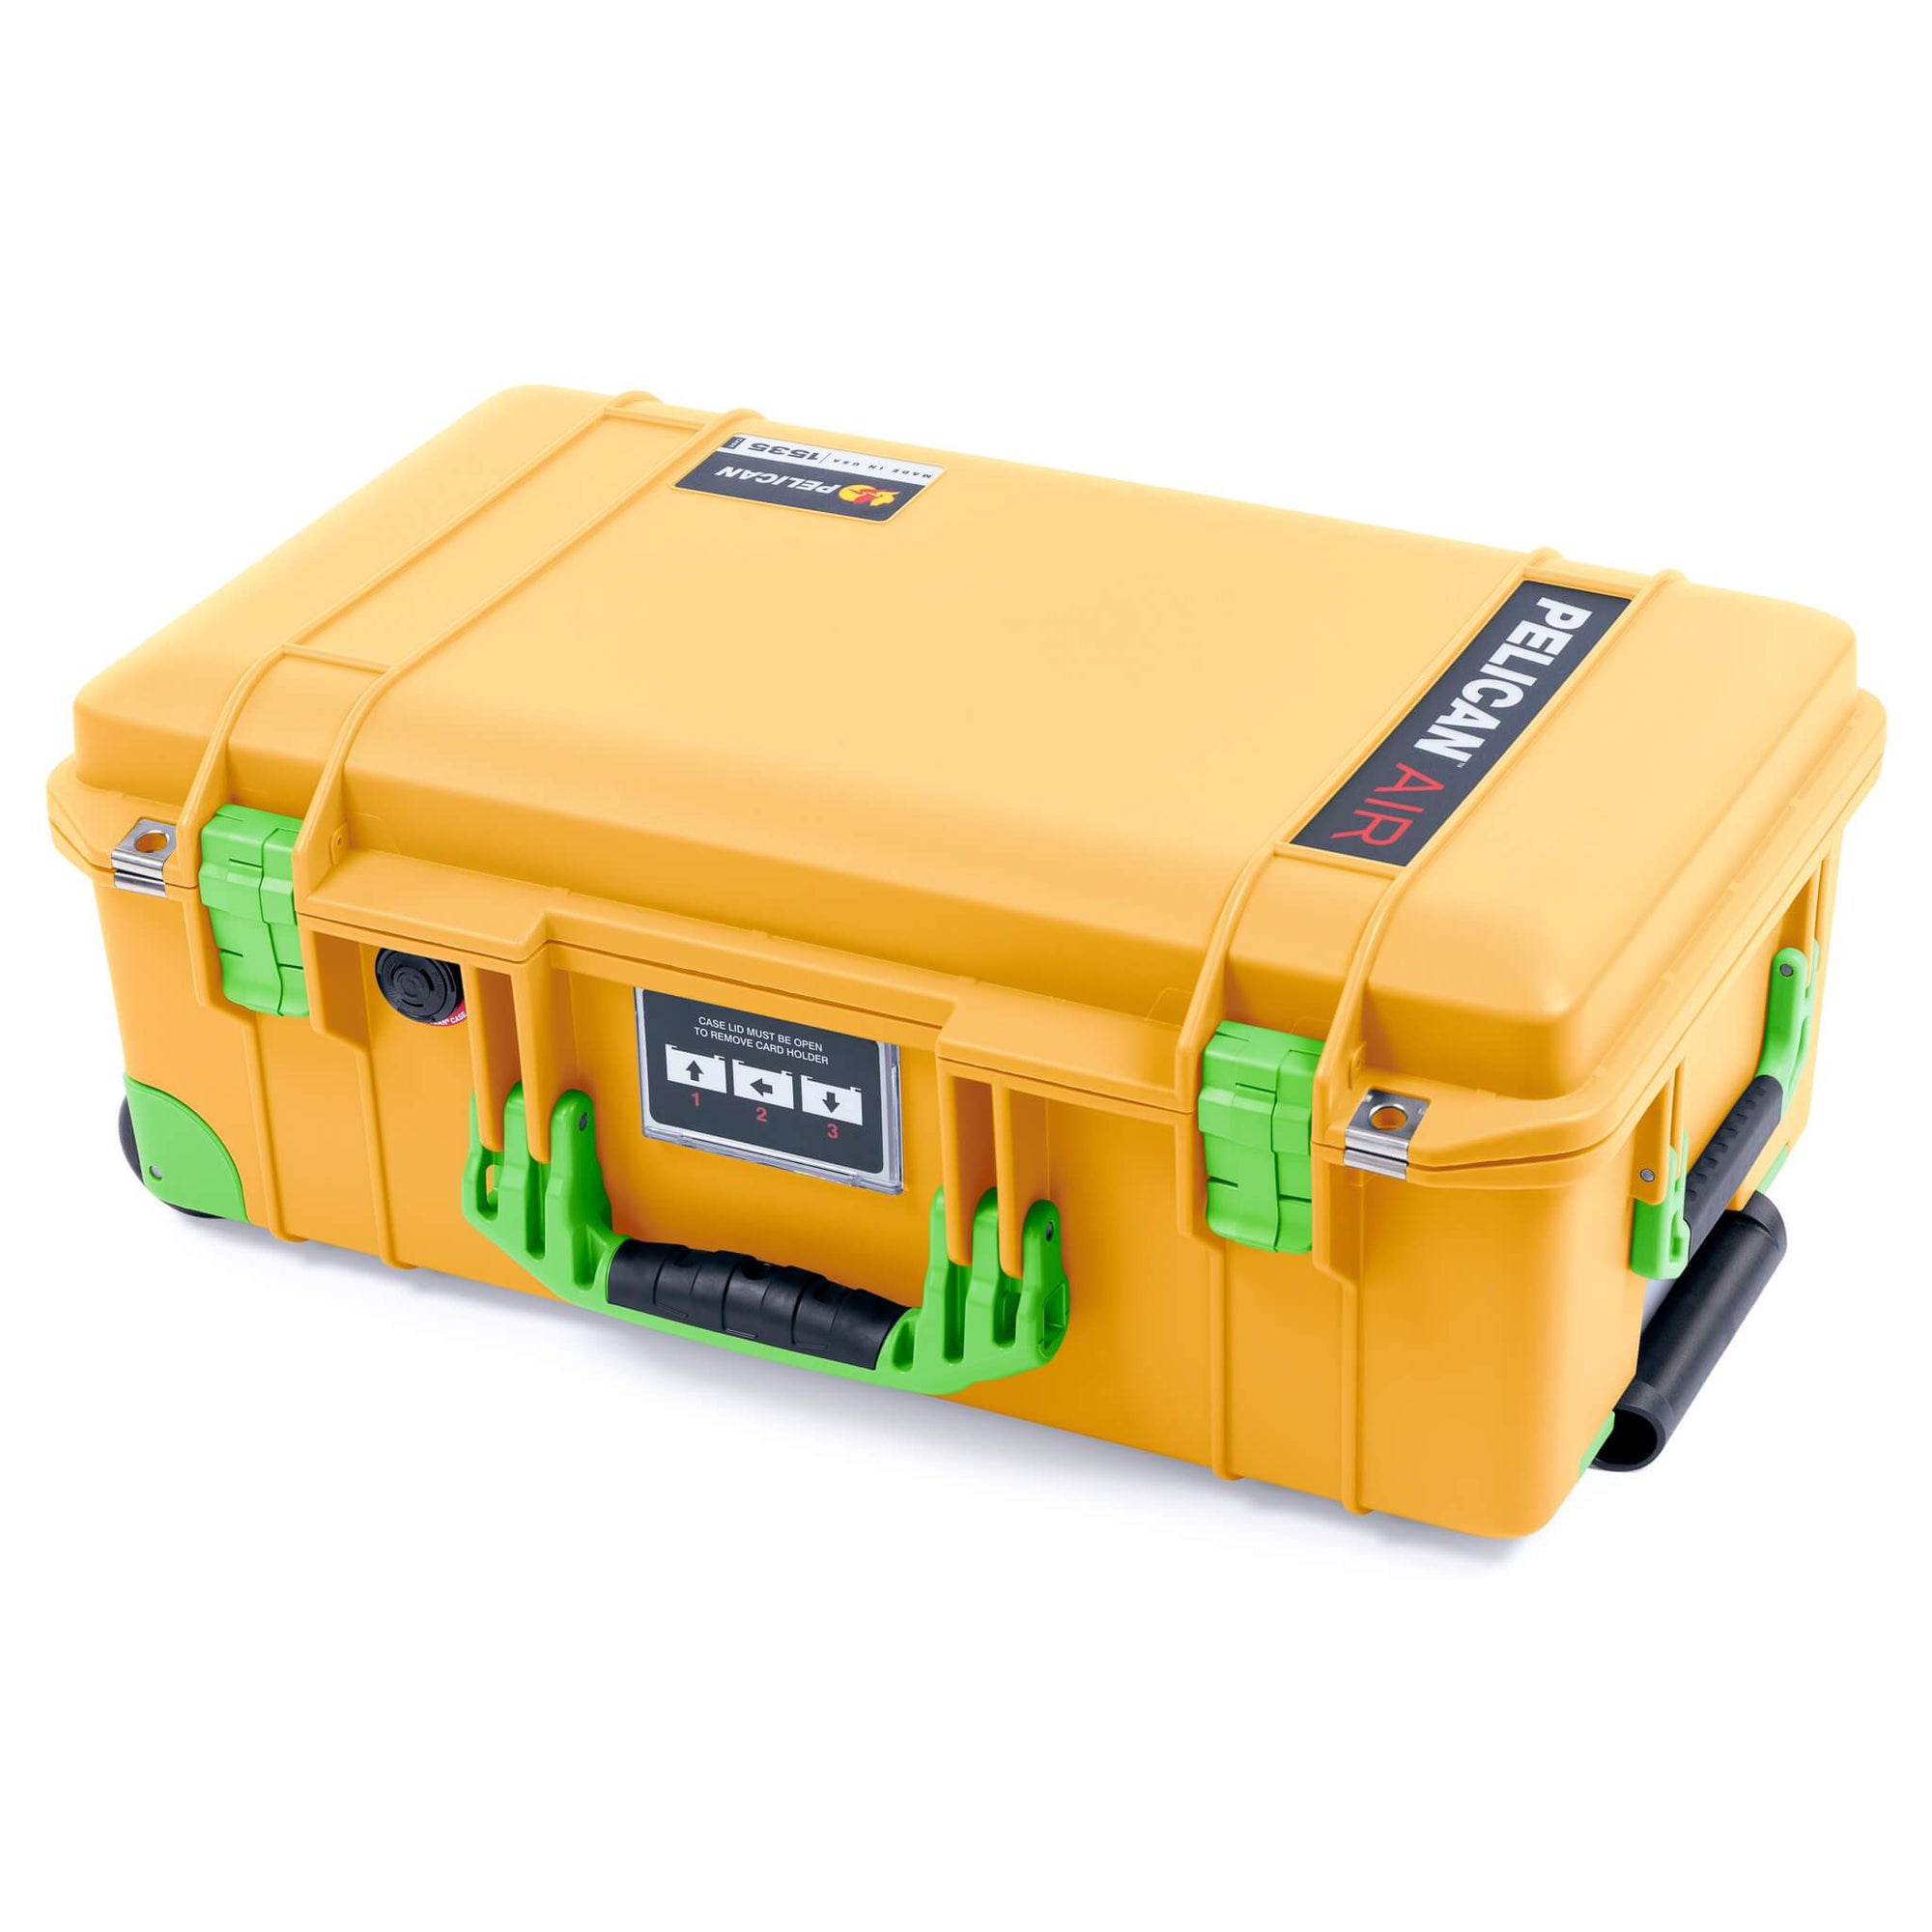 Pelican 1535 Air Case, Yellow with Lime Green Handles, Latches & Trolley ColorCase 